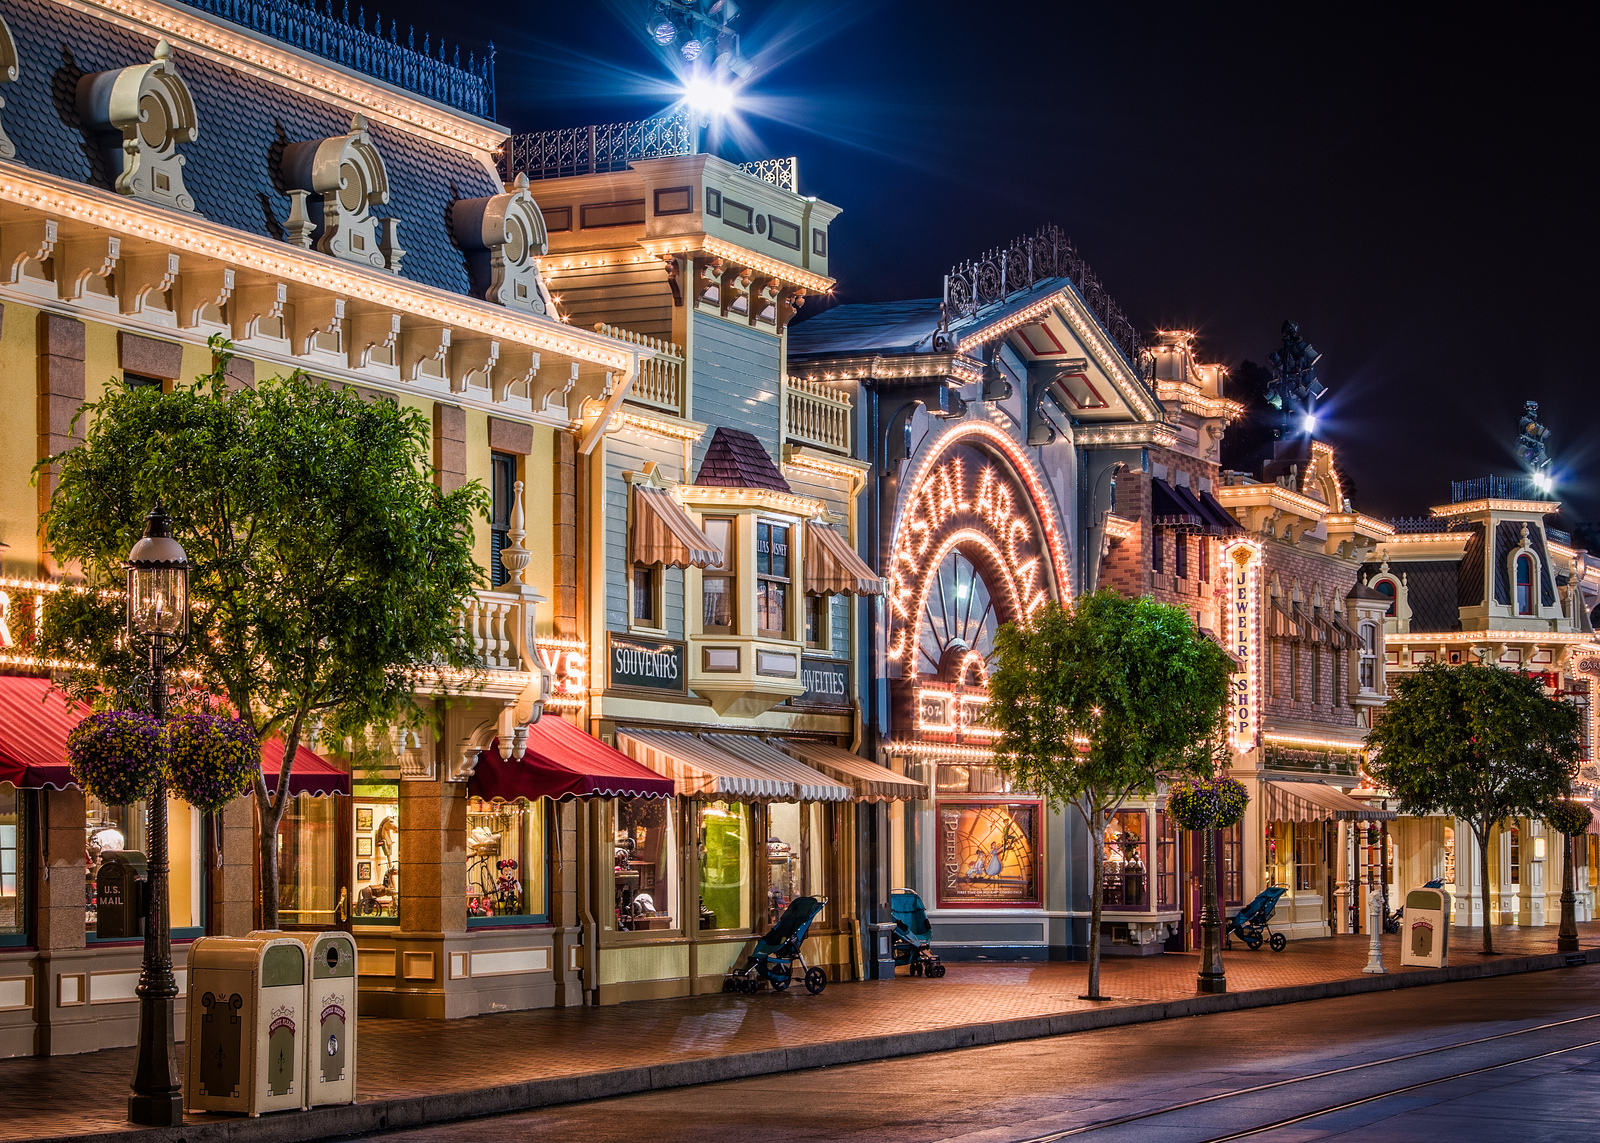 check out the New Disneyland Hd Wallpapers and HD Images and photos at